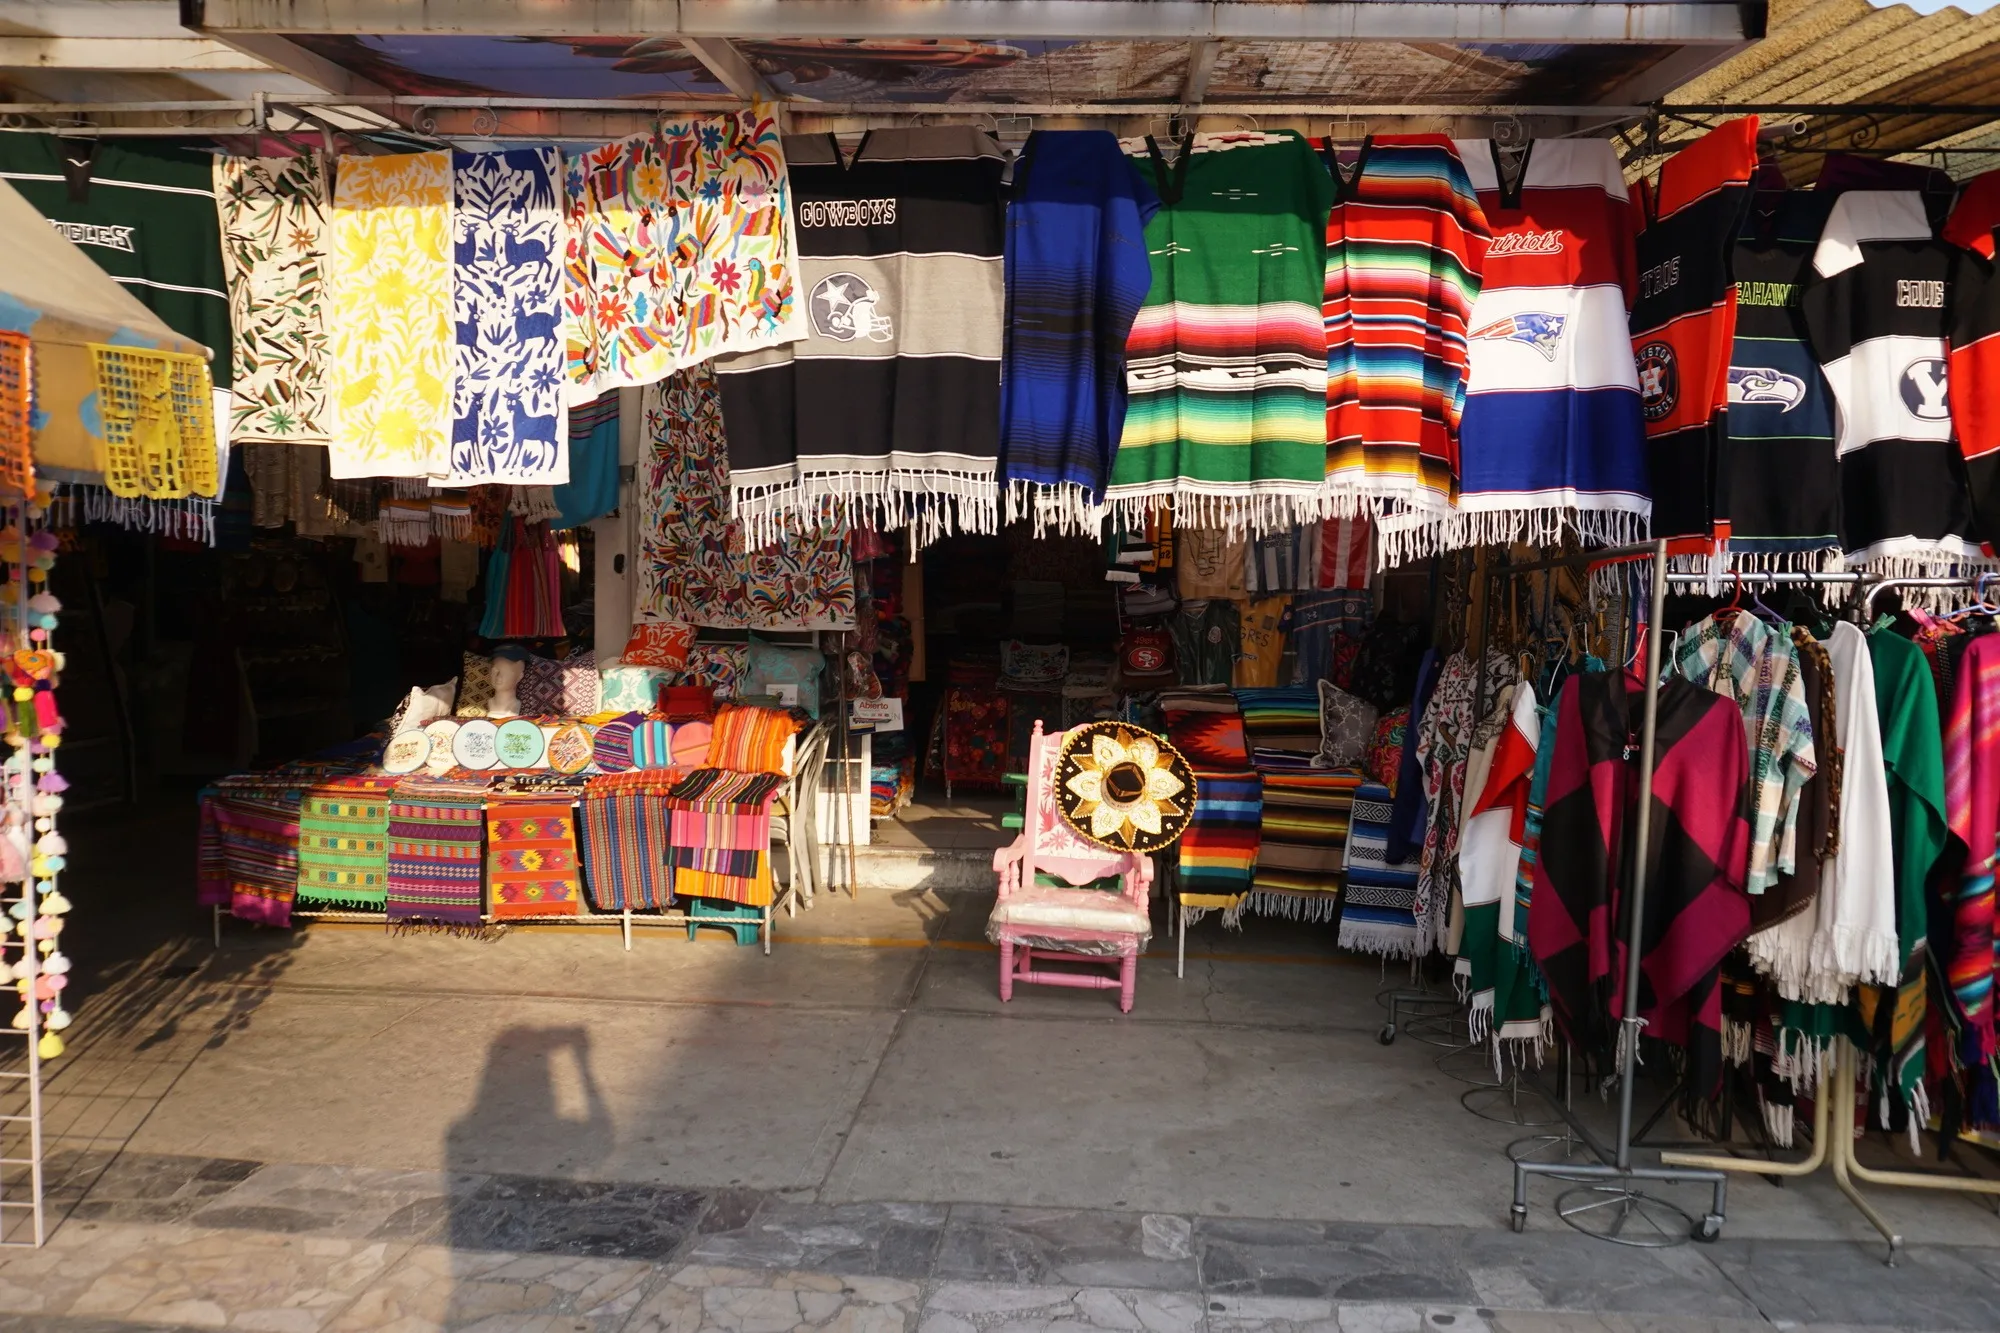 The Ciudadela Market in Mexico, north_america | Other Crafts,Handicrafts,Home Decor - Country Helper